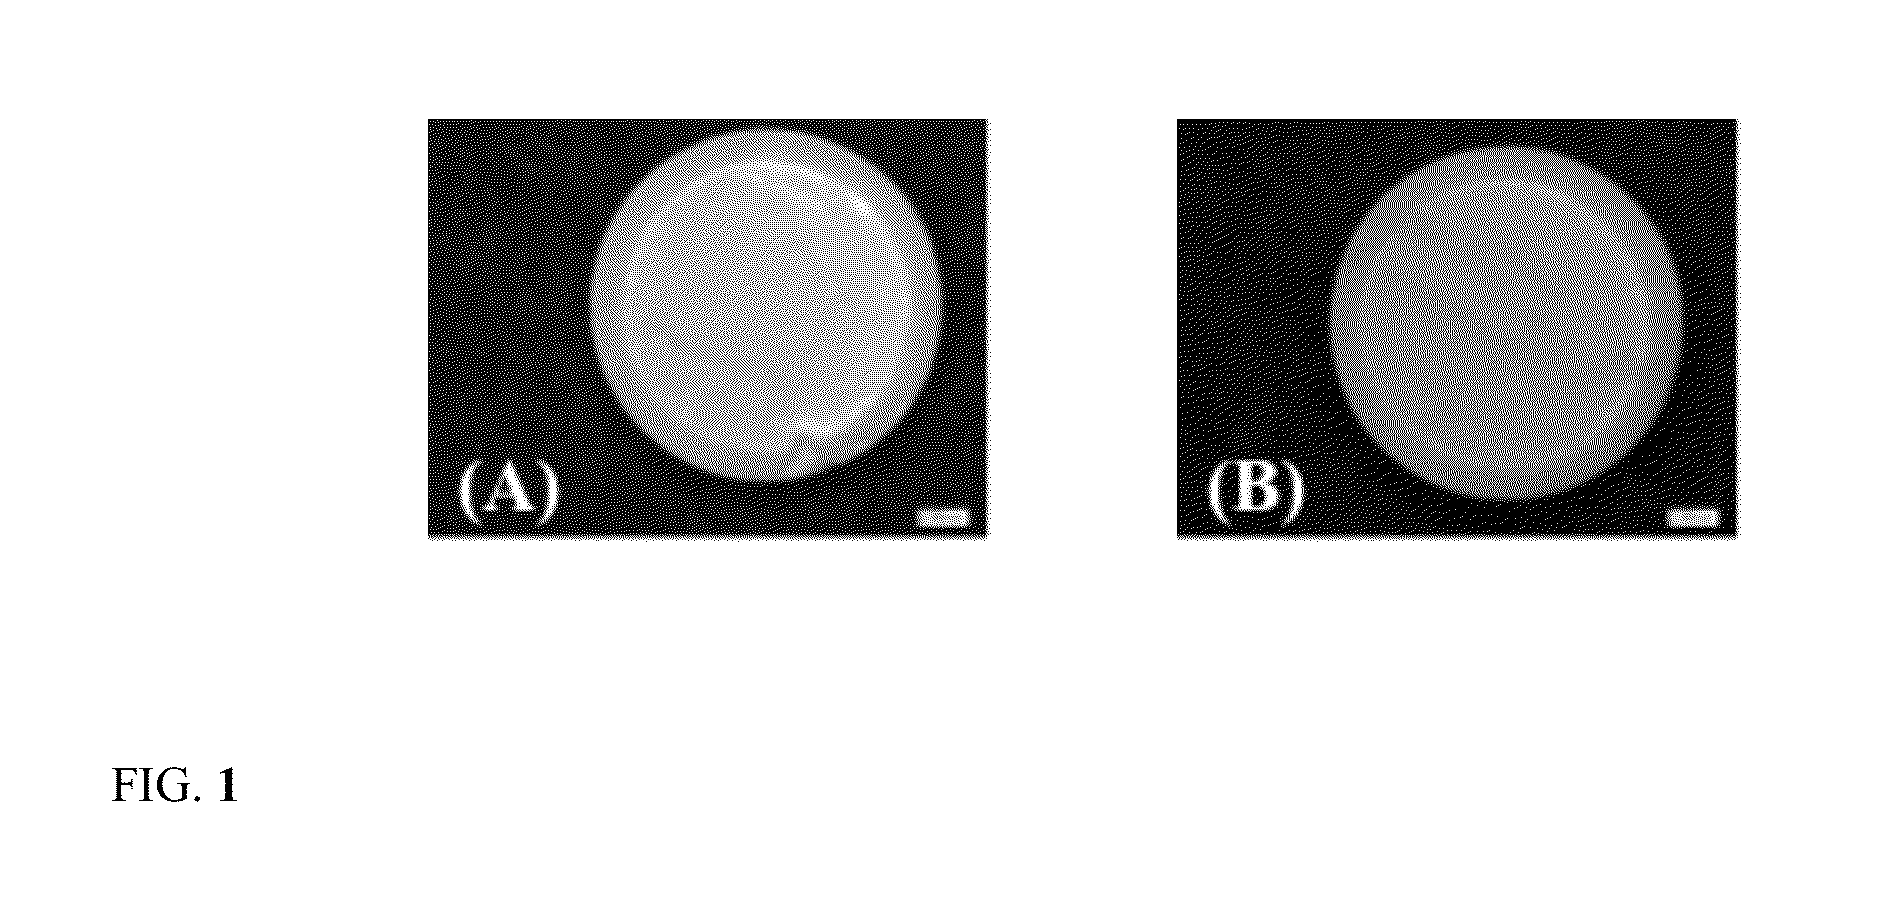 Sustained release oral matrix and methods of making thereof